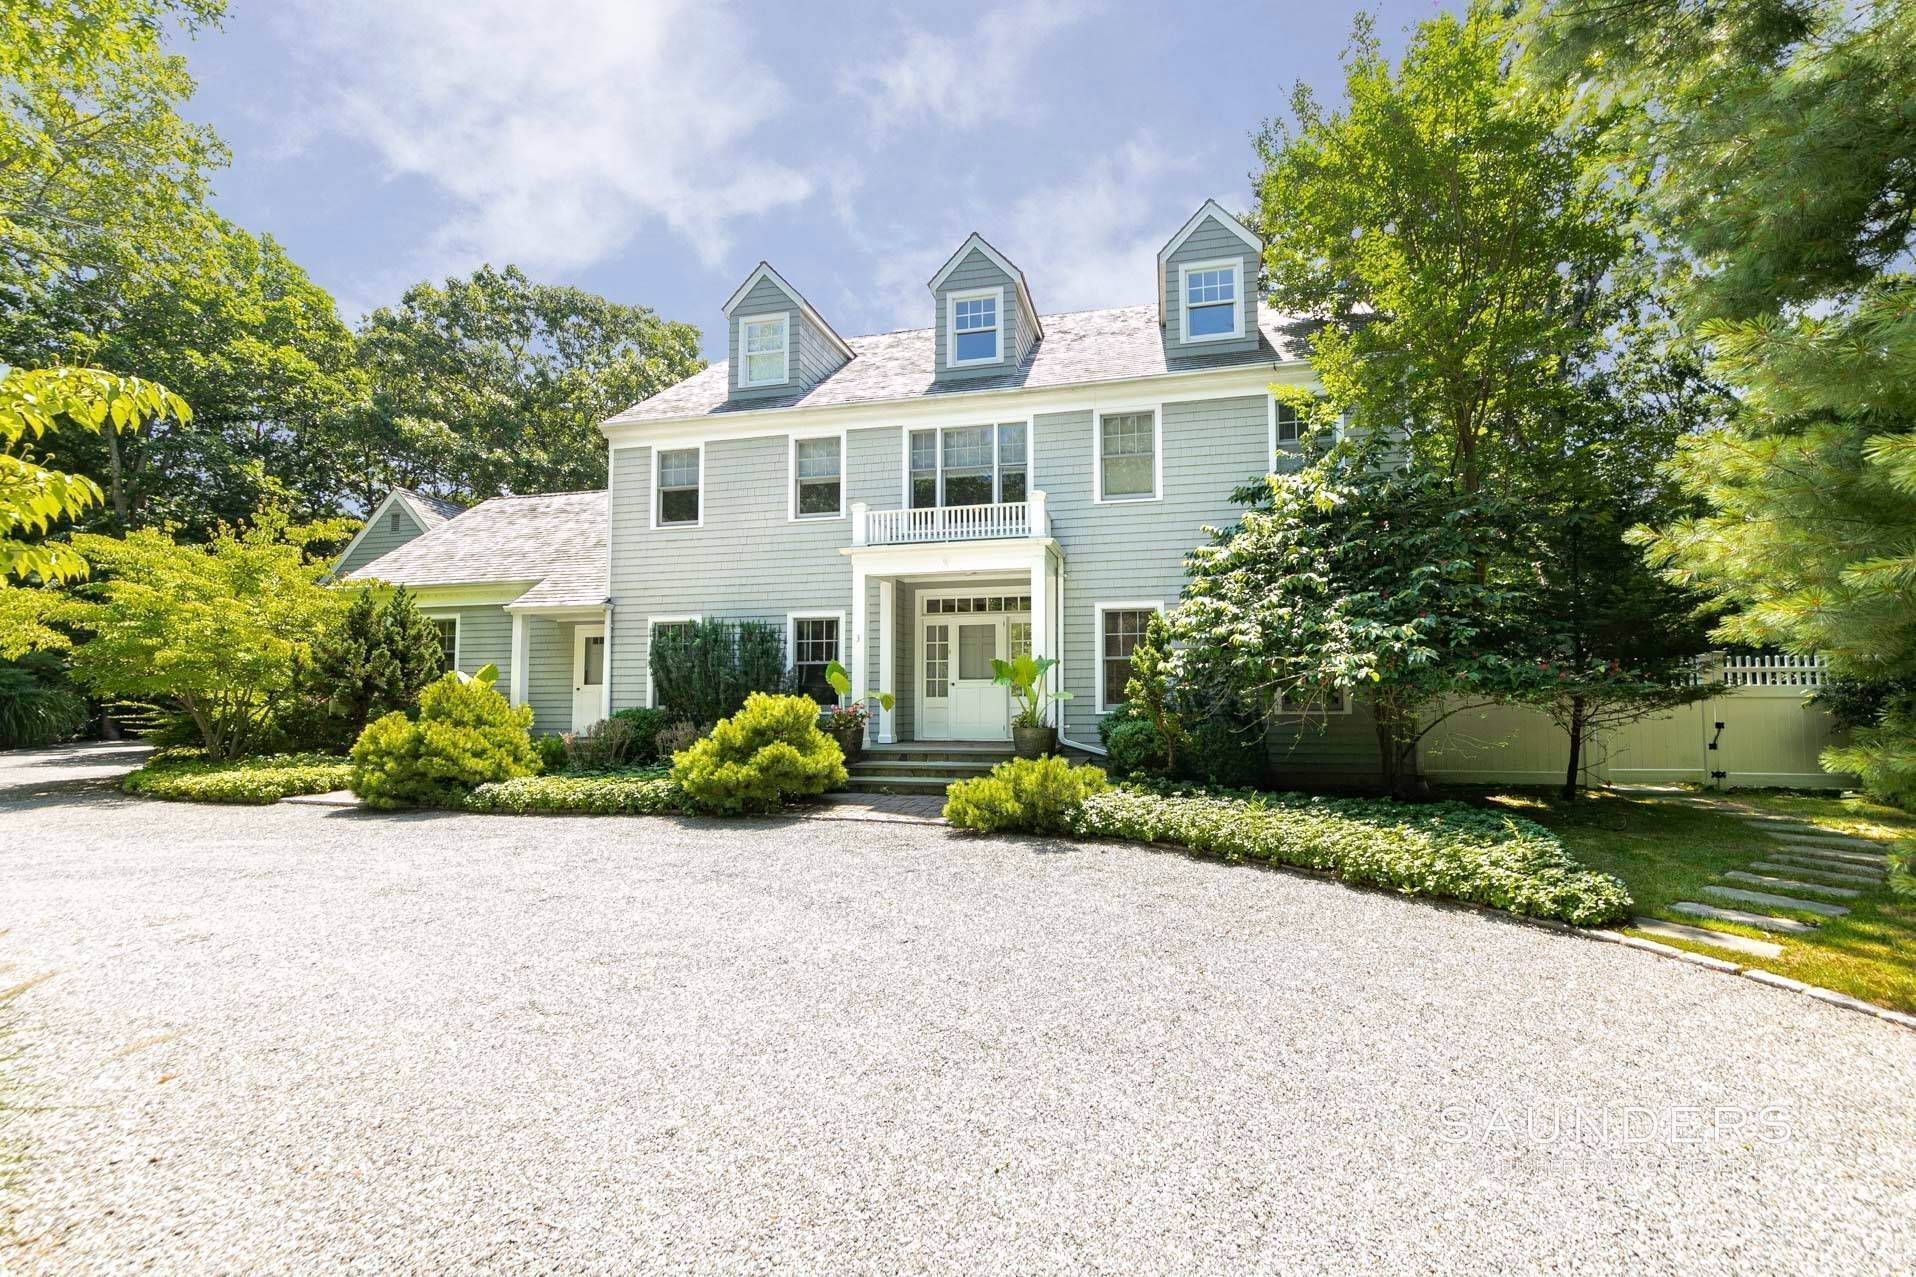 Single Family Homes for Sale at Immaculate Hamptons Retreat 3 Barclay Court, East Hampton, NY 11937